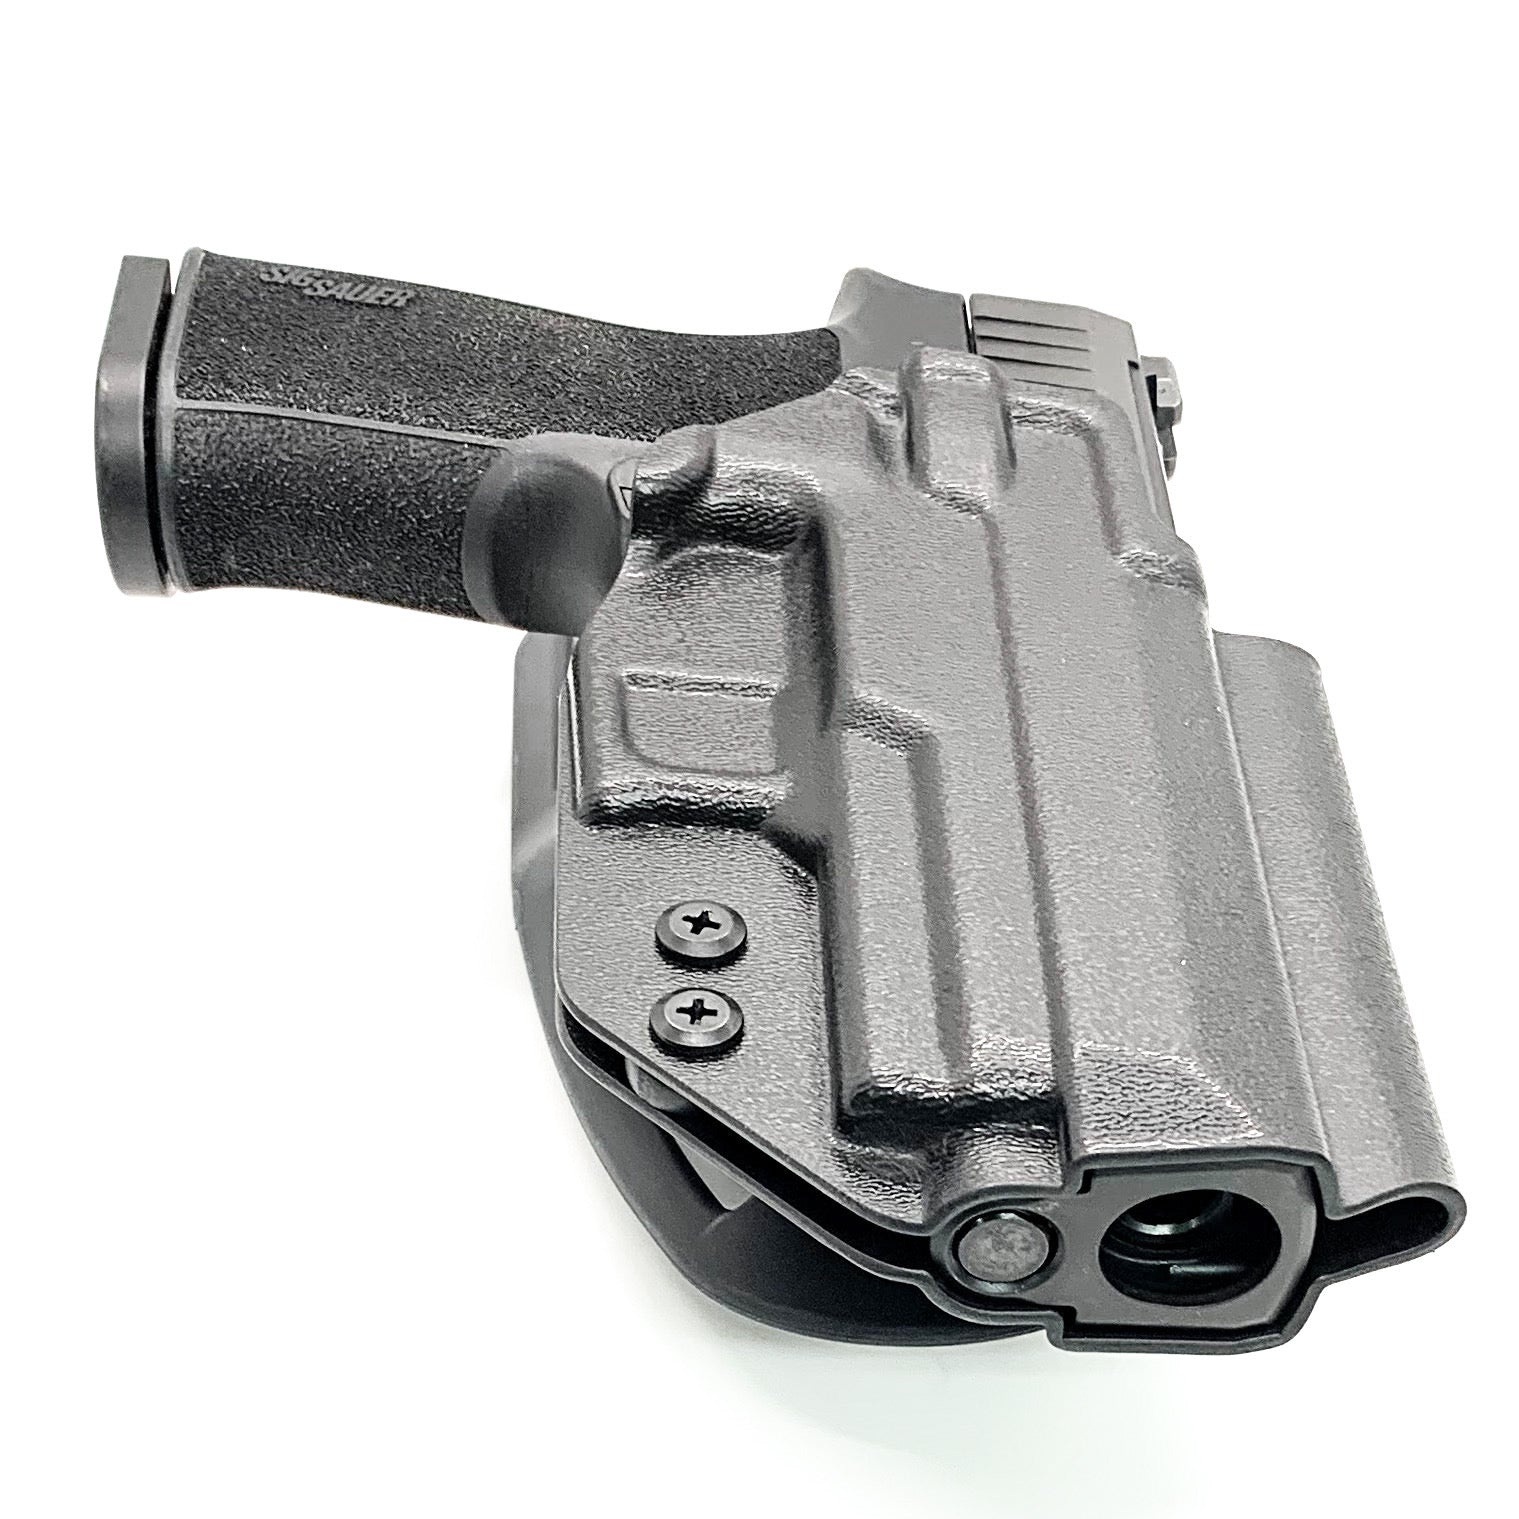 For the best Outside Waistband Duty and Competition Style Holster designed to fit the Sig Sauer P320-XTEN Comp 10MM shop Four Brothers Holsters.  Open Muzzle, Full Sweat Guard, Adjustable Retention. Profile cut for red dot sights and optics on the pistol. Made in the USA.  10 for the Win! P320-XTEN Comp